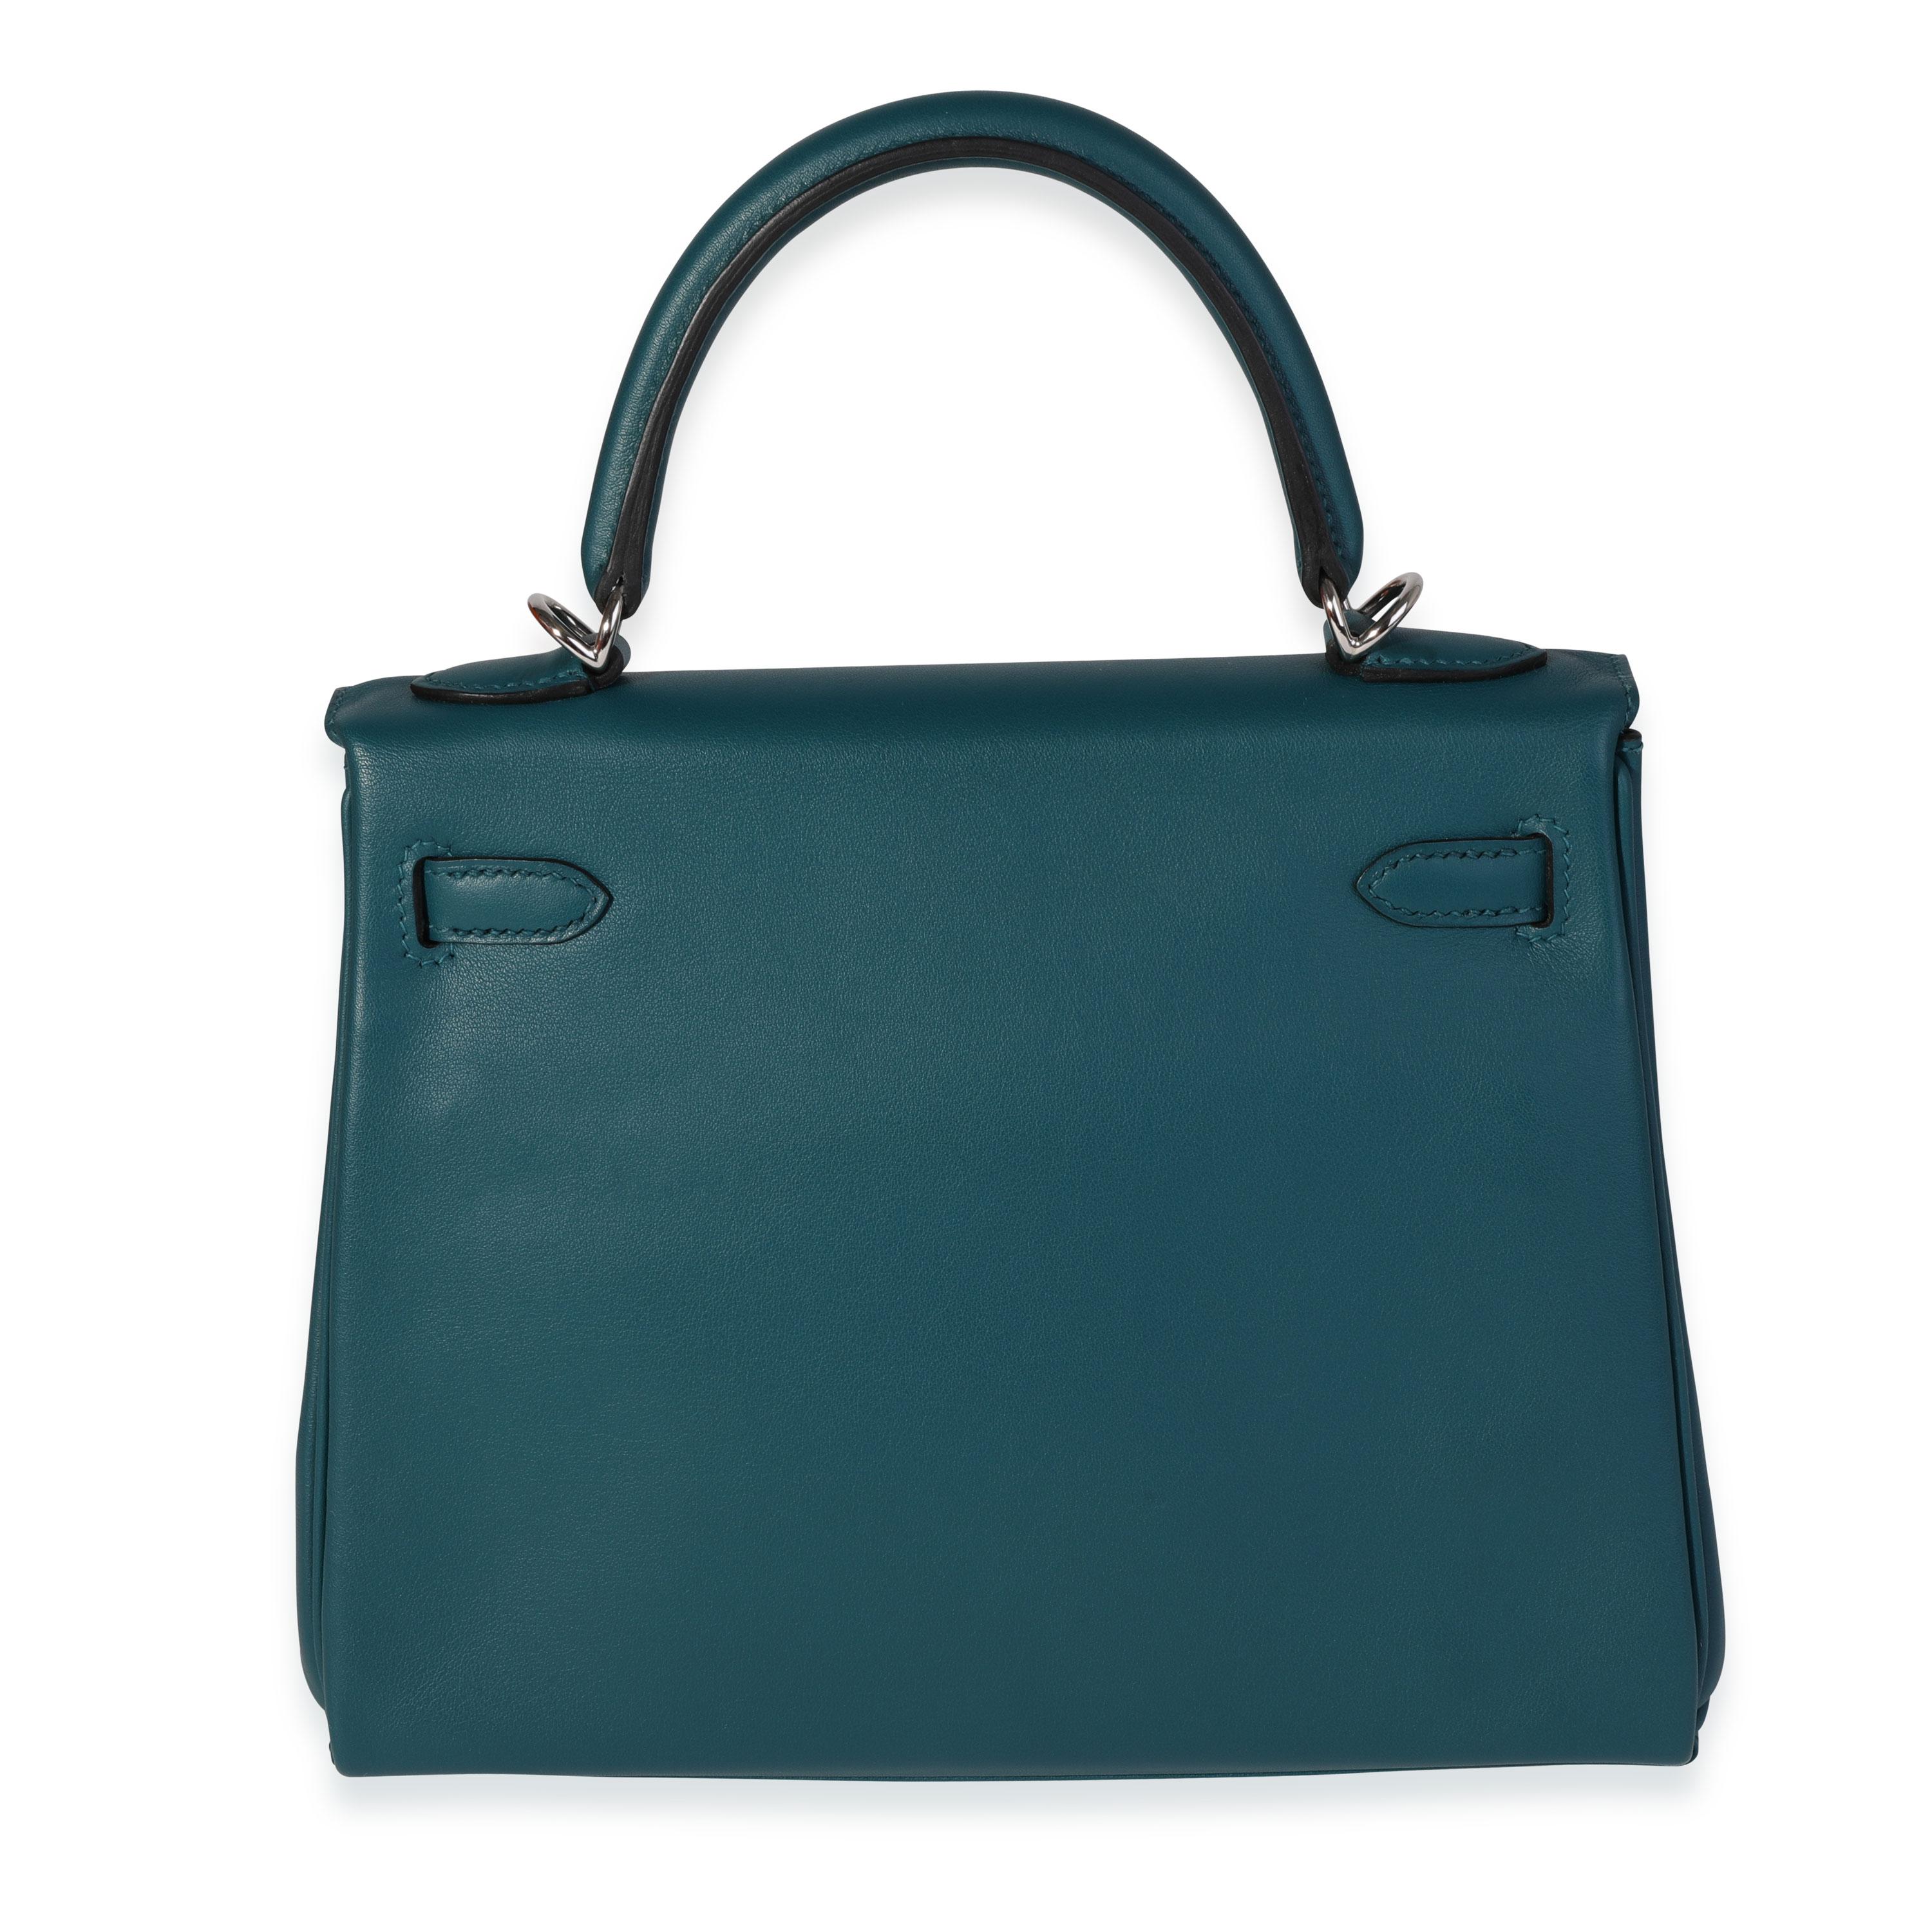 Listing Title: Hermès Vert Bosphore Swift Retourne Kelly 25 PHW
SKU: 120648
Condition: Pre-owned (3000)
Handbag Condition: Excellent
Condition Comments: Excellent Condition. Light scuffing to leather. No other visible signs of wear.
Brand: